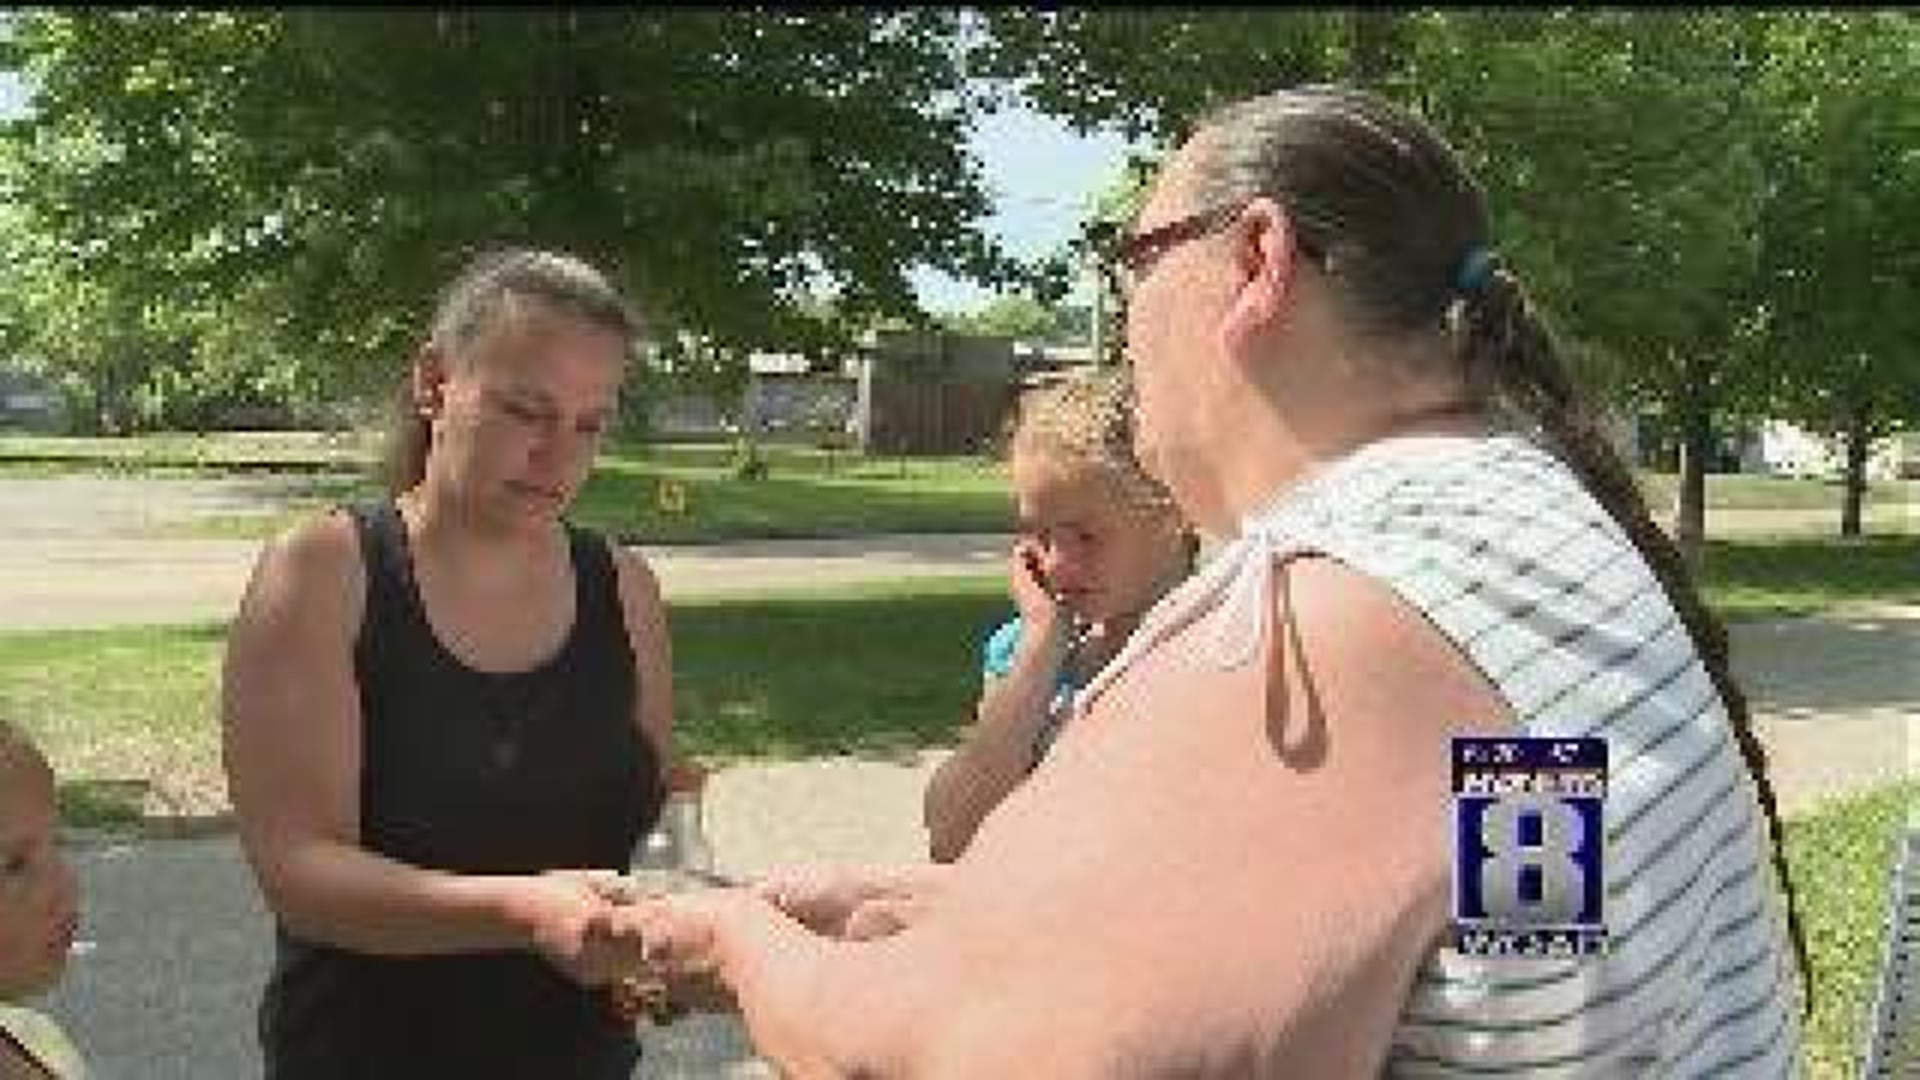 News 8 Helps Mom "Pay It Forward" to Daughter